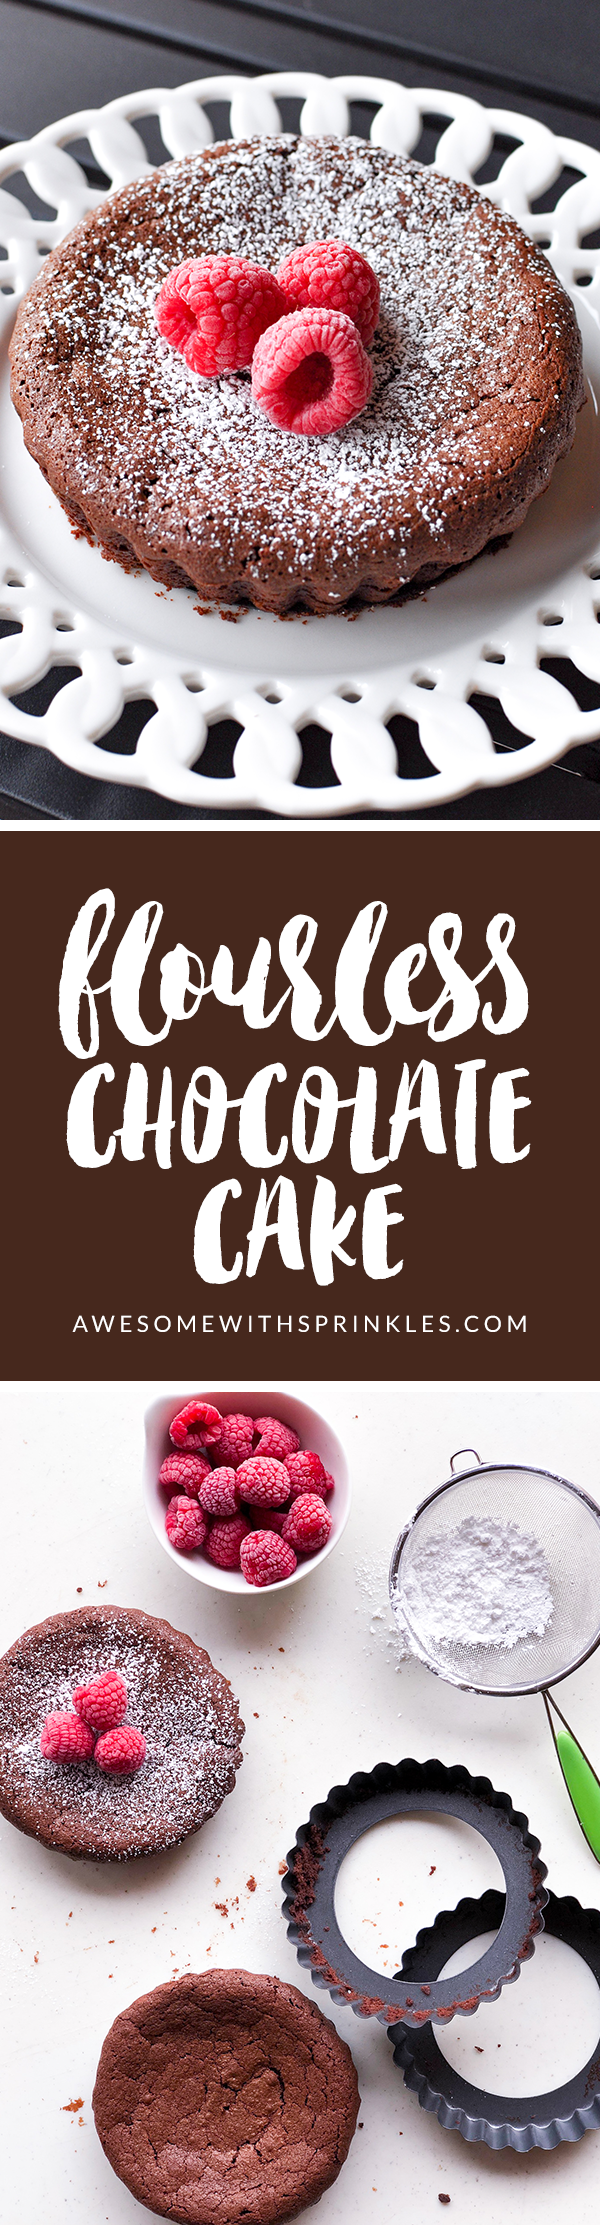 Flourless Chocolate Cake | Awesome with Sprinkles